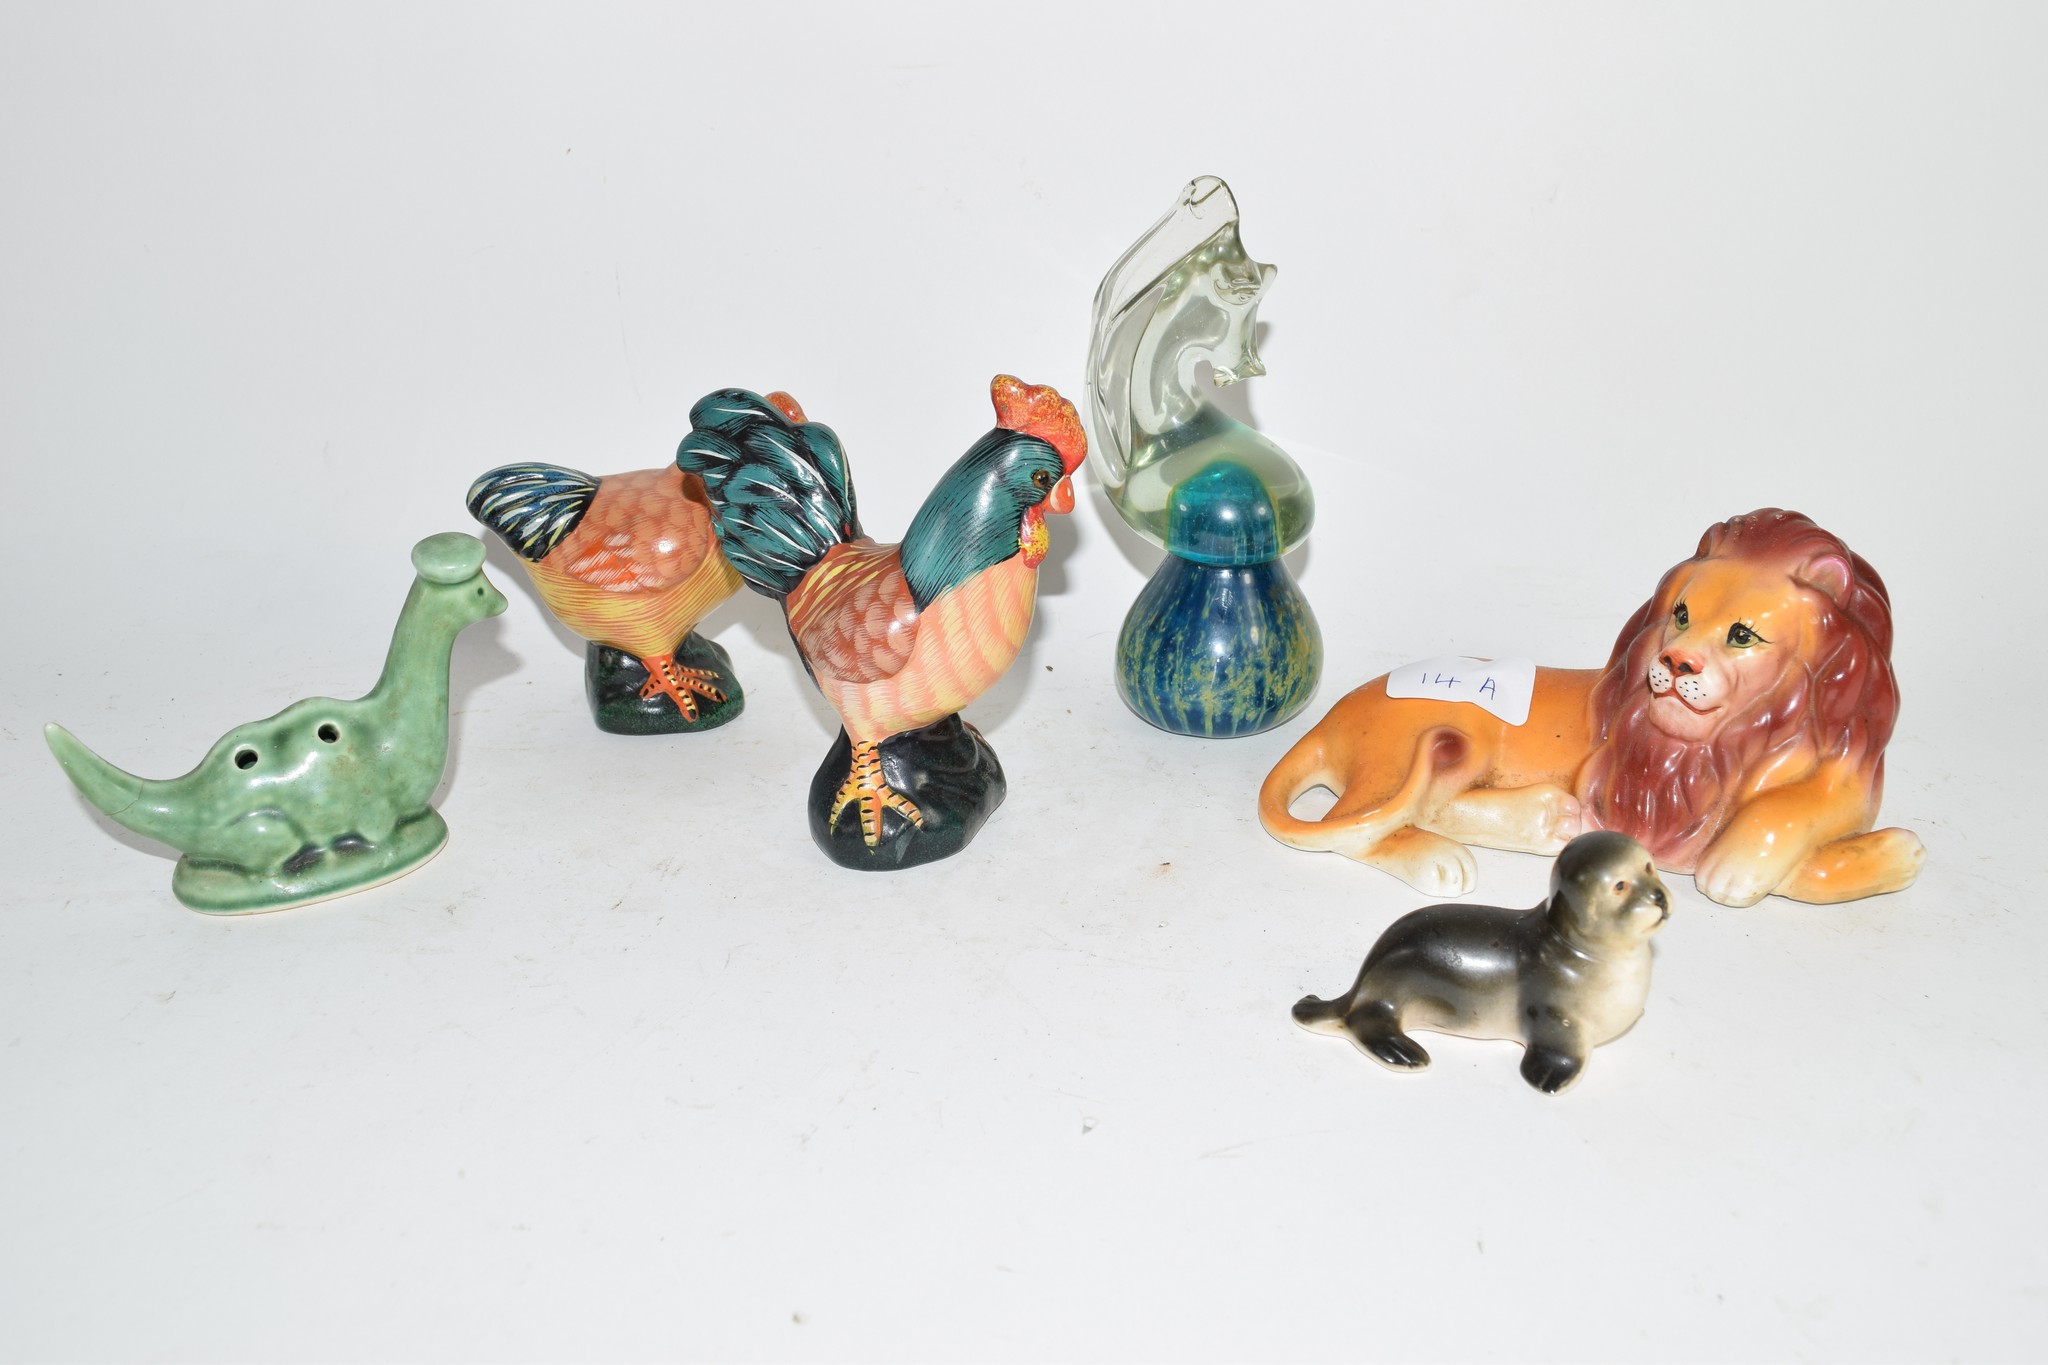 QUANTITY OF CHINA WARES INCLUDING MODEL OF A LION, OTHER ANIMAL MODELS AND SMALL POTTERY FIGURES - Image 2 of 4